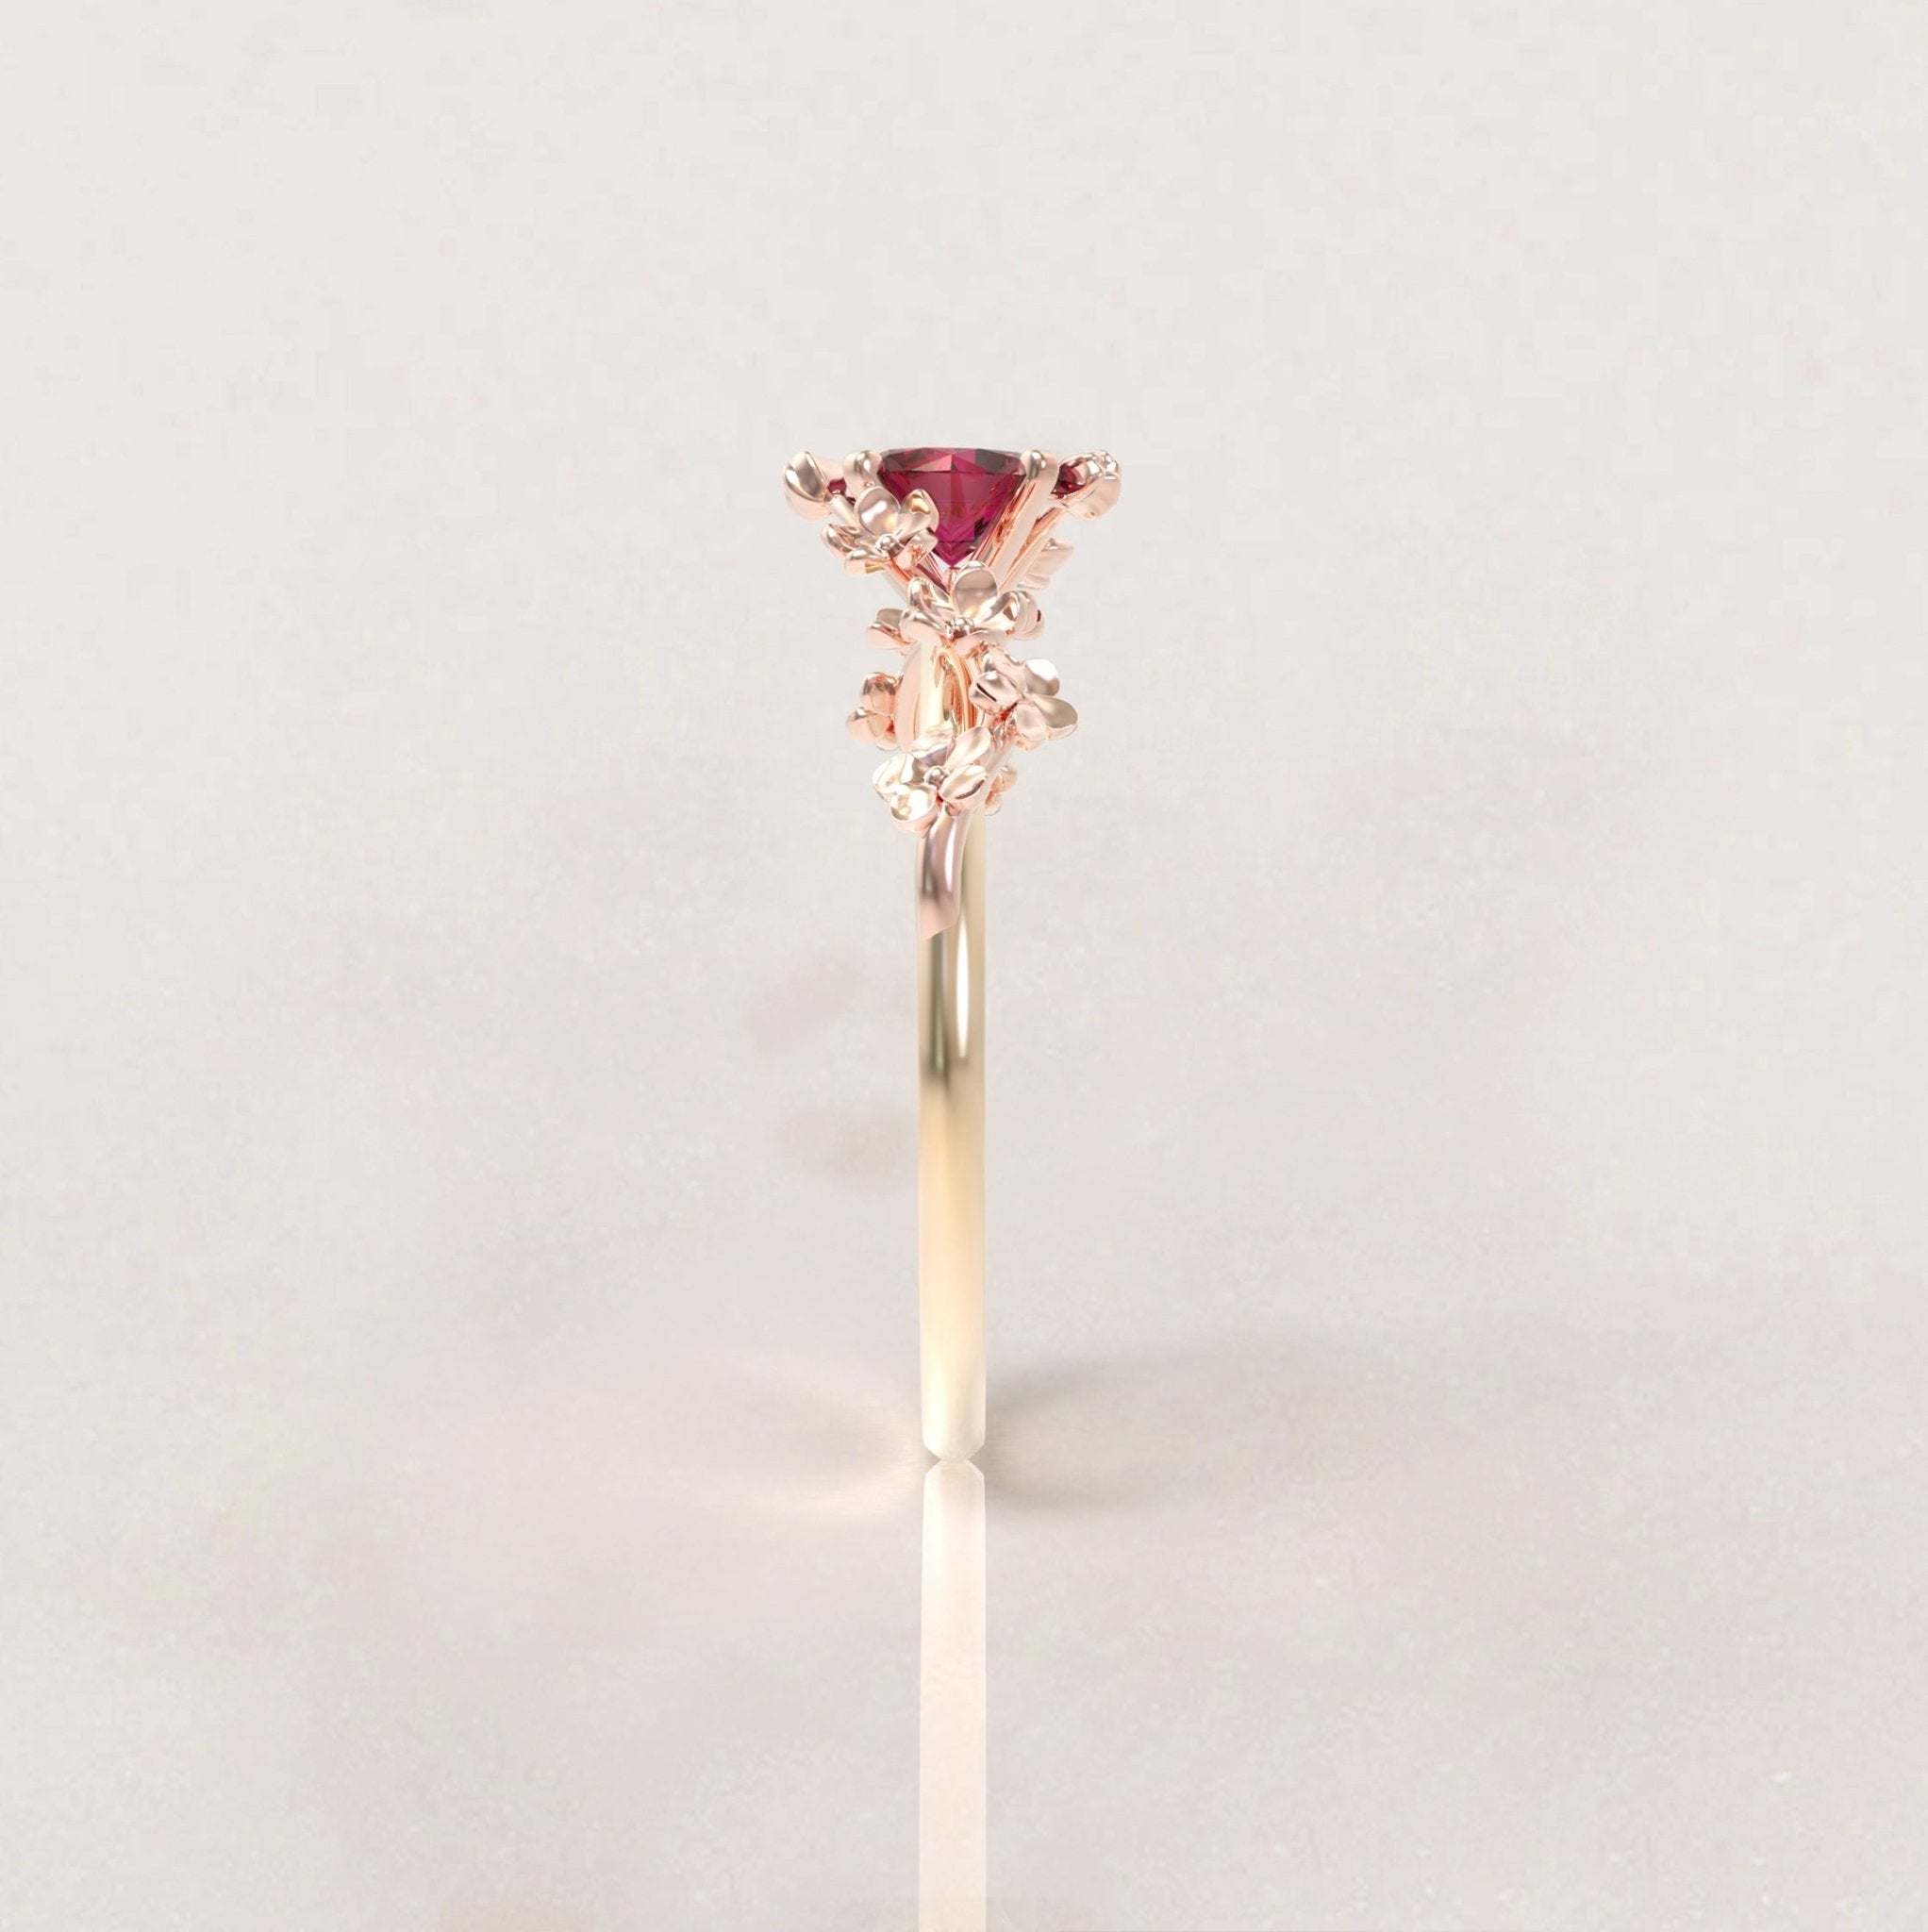 Unique Flowers Engagement Ring No.6 Version 2 in Yellow Band/Rose Flowers Gold - Red Ruby - Roelavi